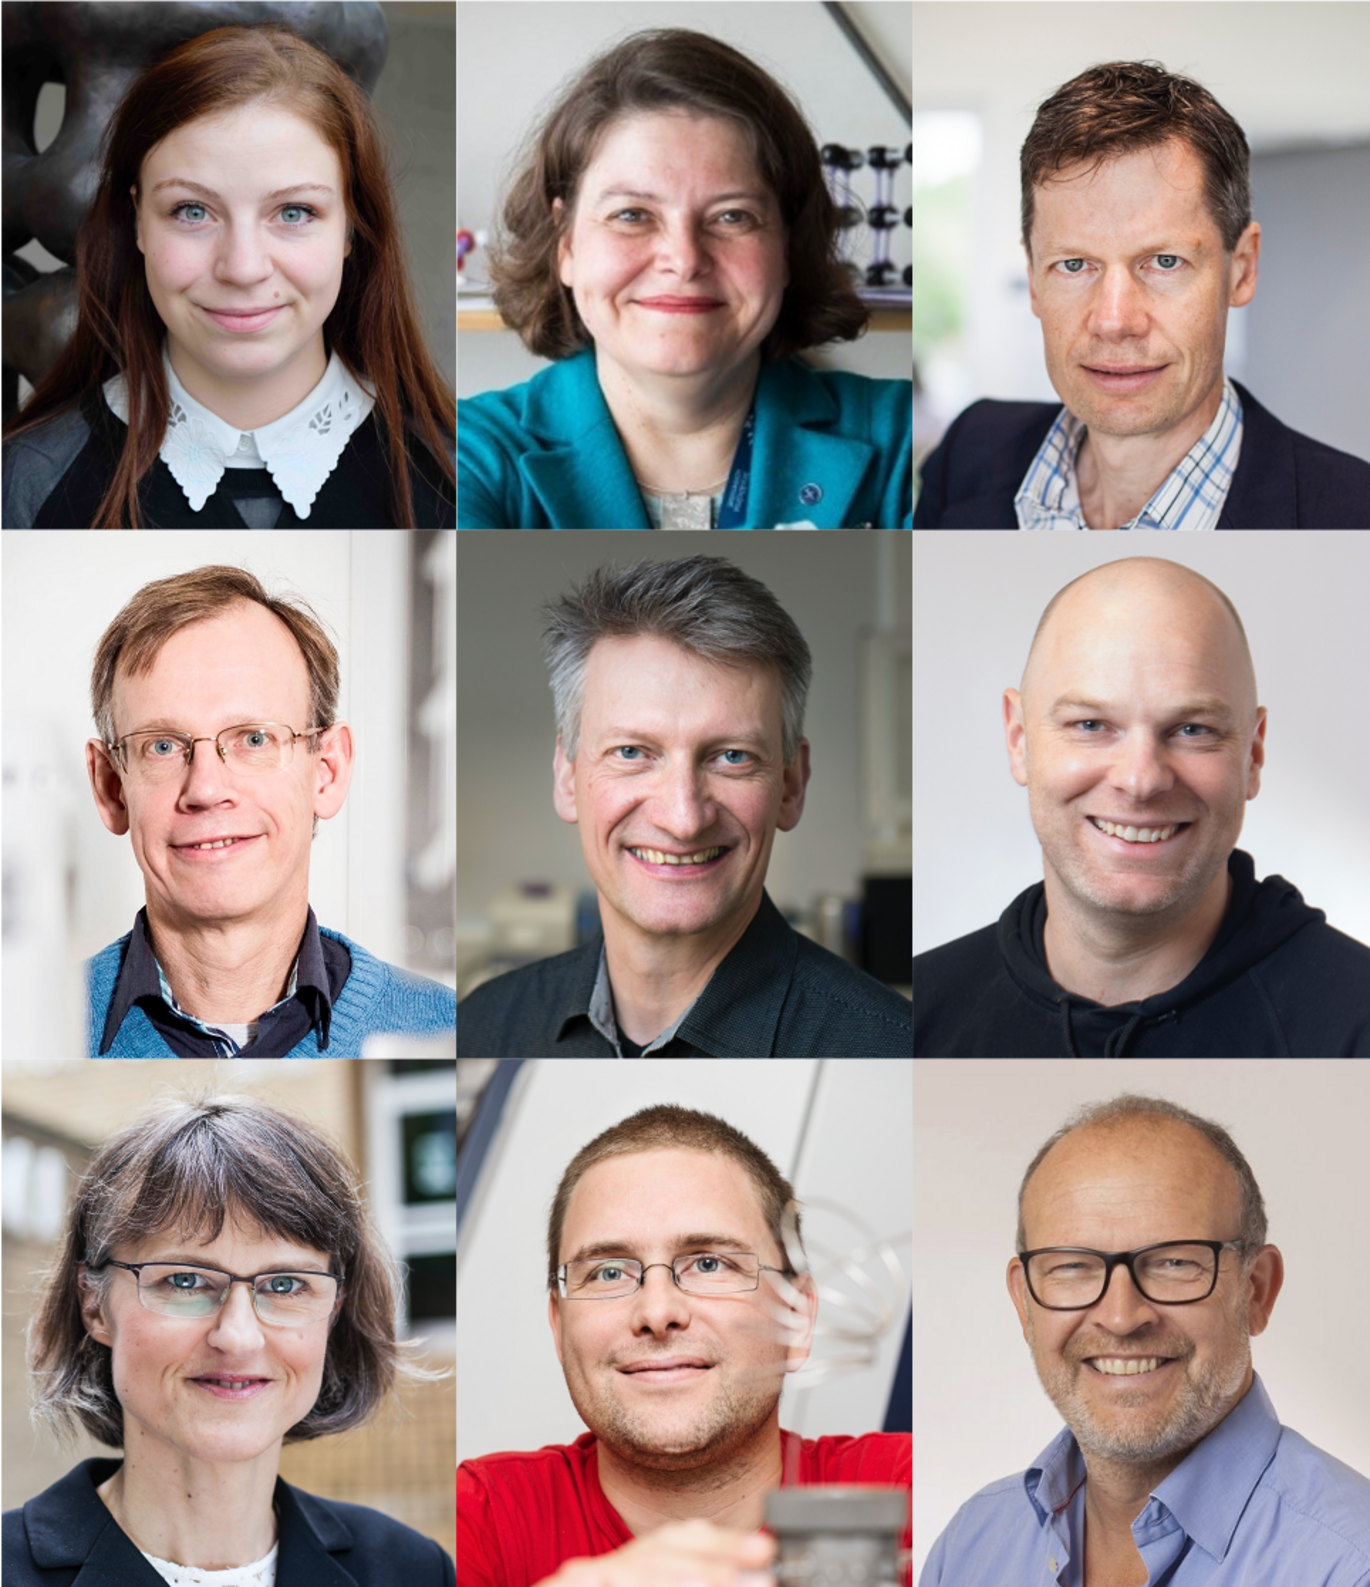 iNANO associated researchers receive DKK 12 m from the Carlsberg Foundation for research instruments and postdoc fellowship abroad. (Photos: Maria Randima, Jesper Rais, Lars Kruse, AU Photo, and Lisbeth Heilesen)